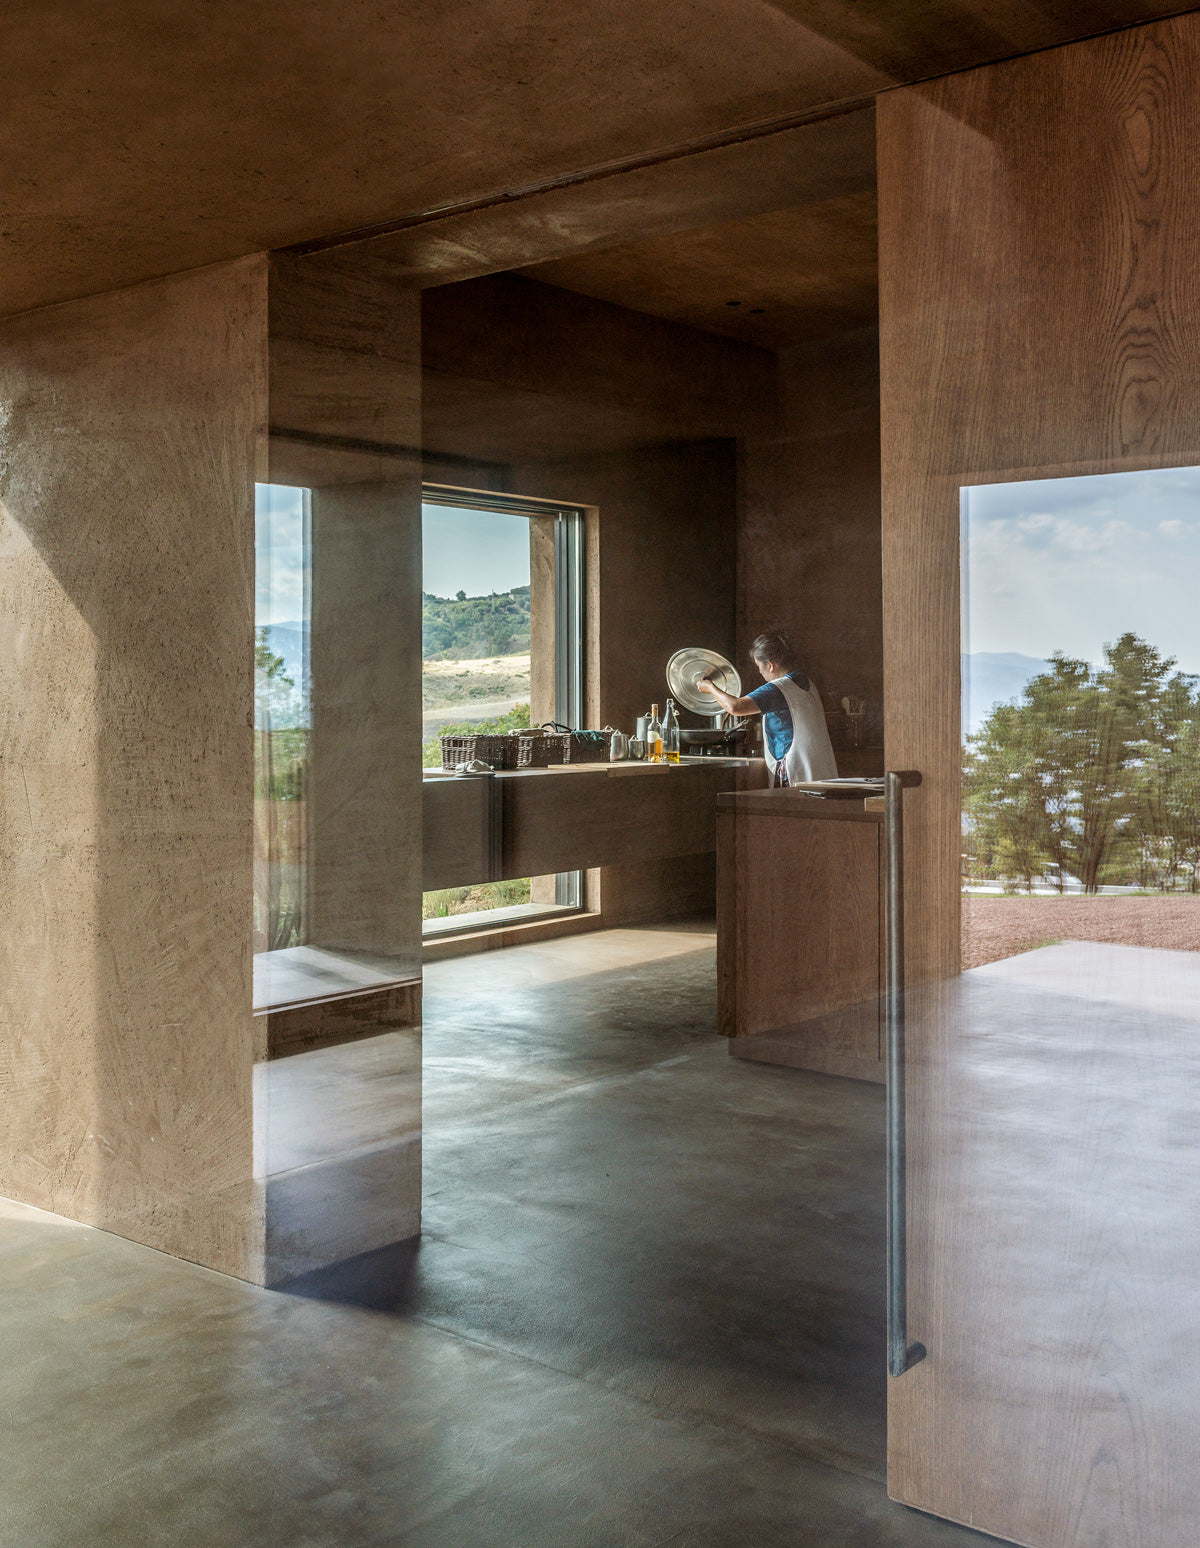 Villa Ra offers an alternative approach to houses within the rural landscape of Calabria and the greatest challenge the project represented, according to what the firm shared with Container, was understanding the landscape.
